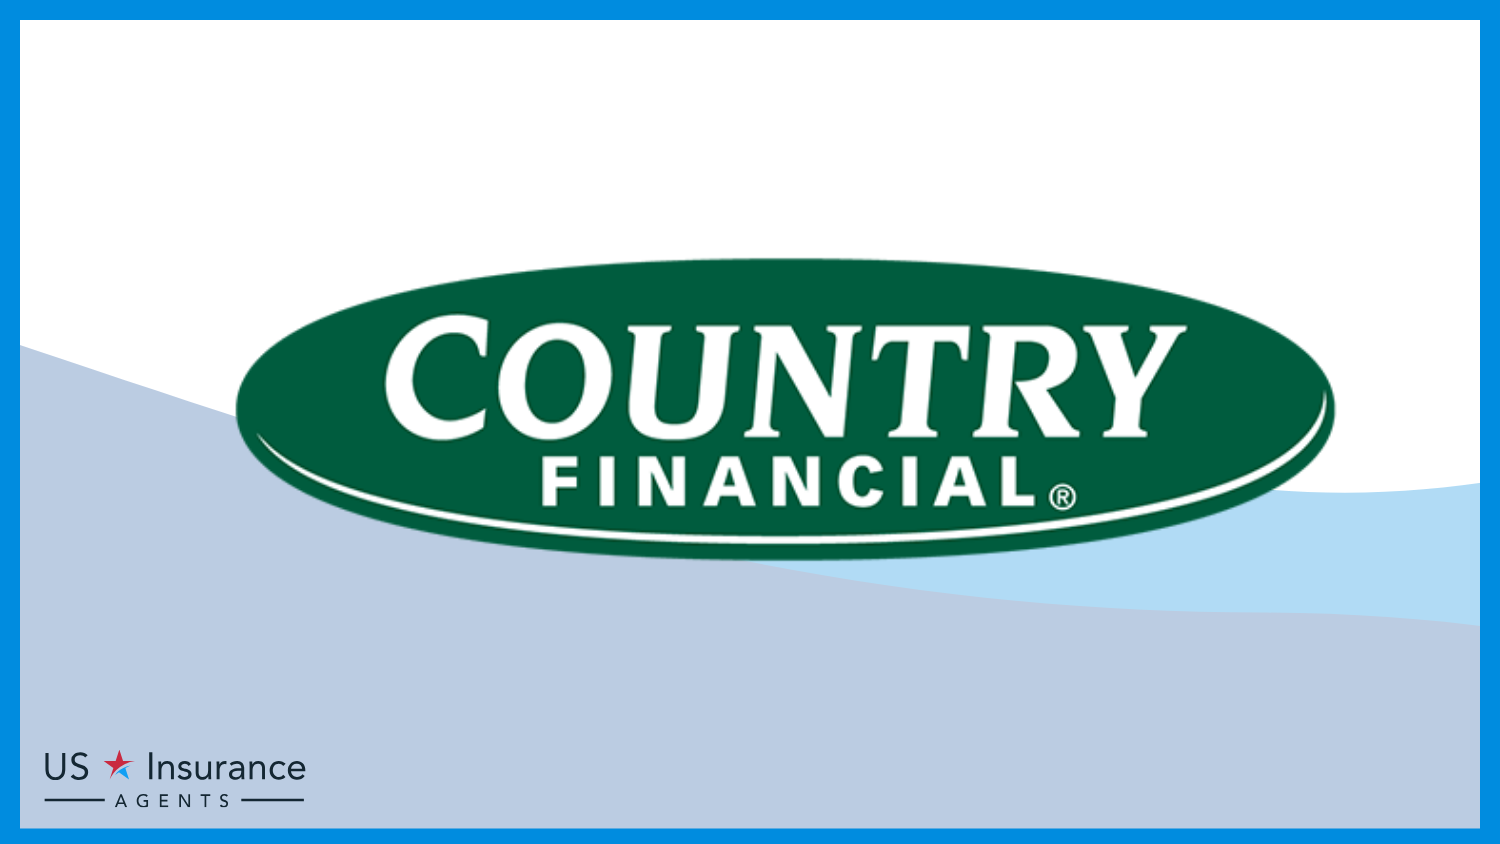 Country Financial: Best Whole Life Insurance